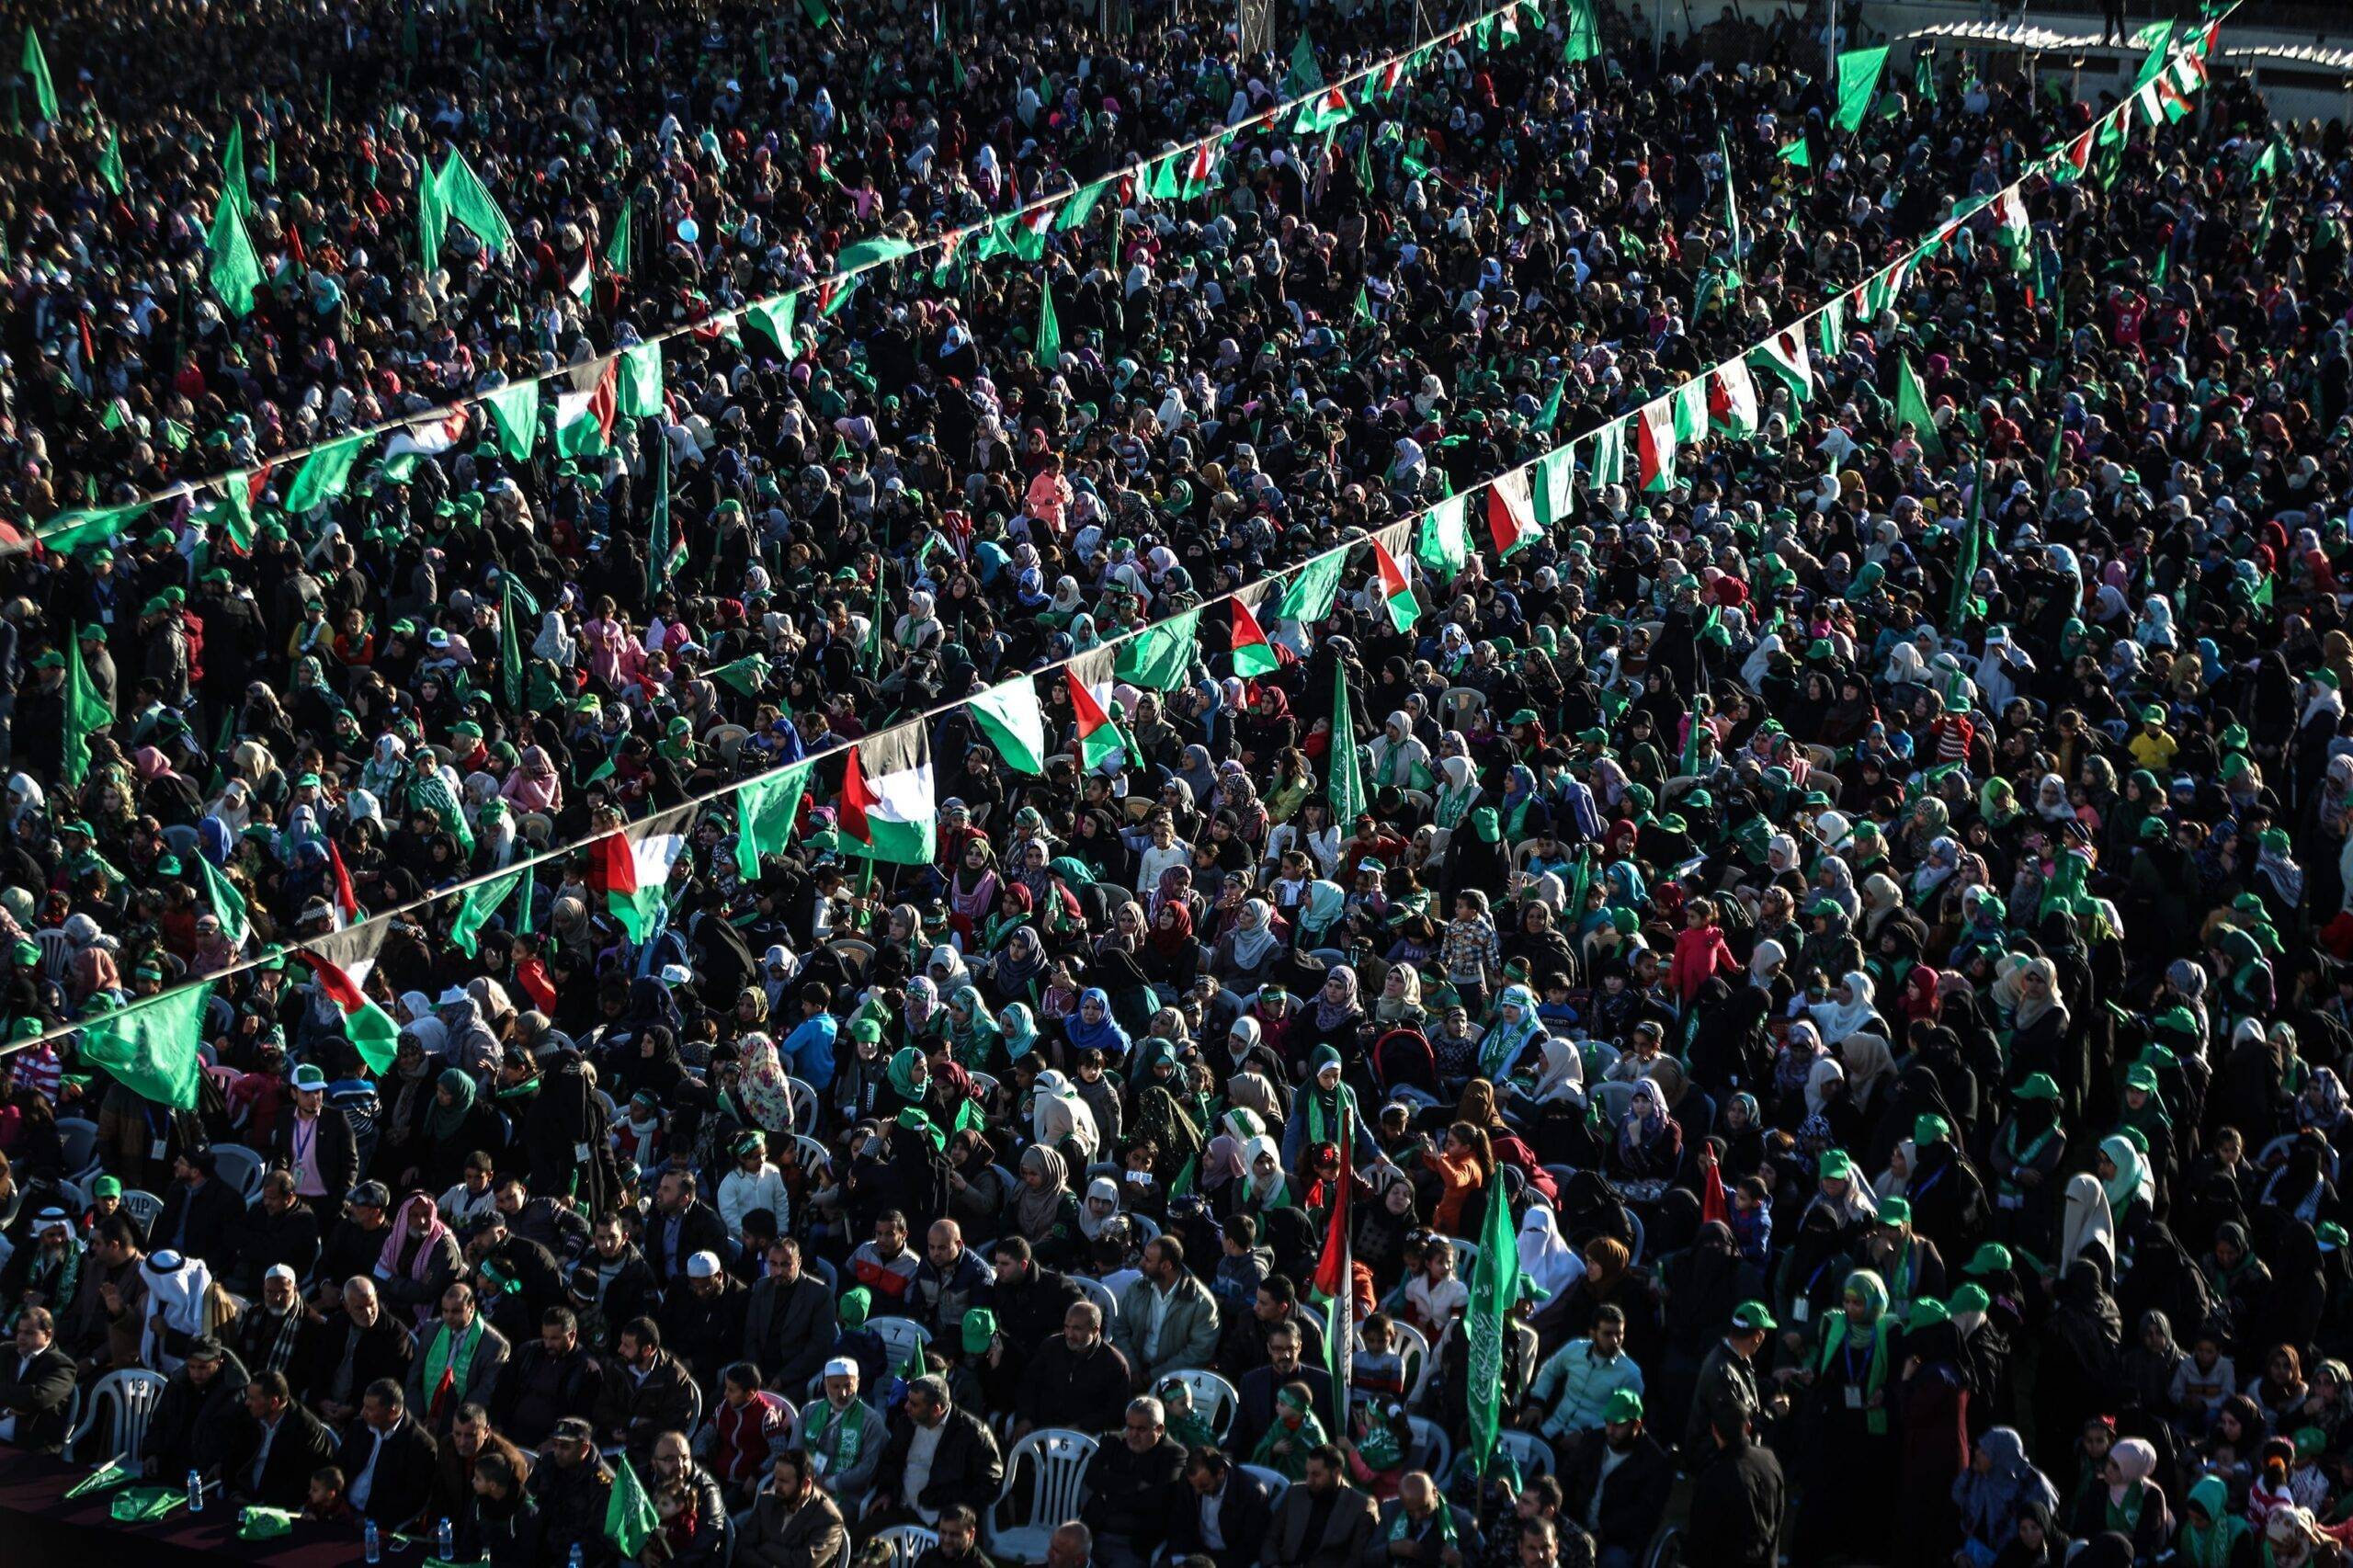 Thousands of people gather to celebrate the 29th anniversary of the foundation of Hamas in Gaza on December 11 2016 [Ali Jadallah / Anadolu Agency]